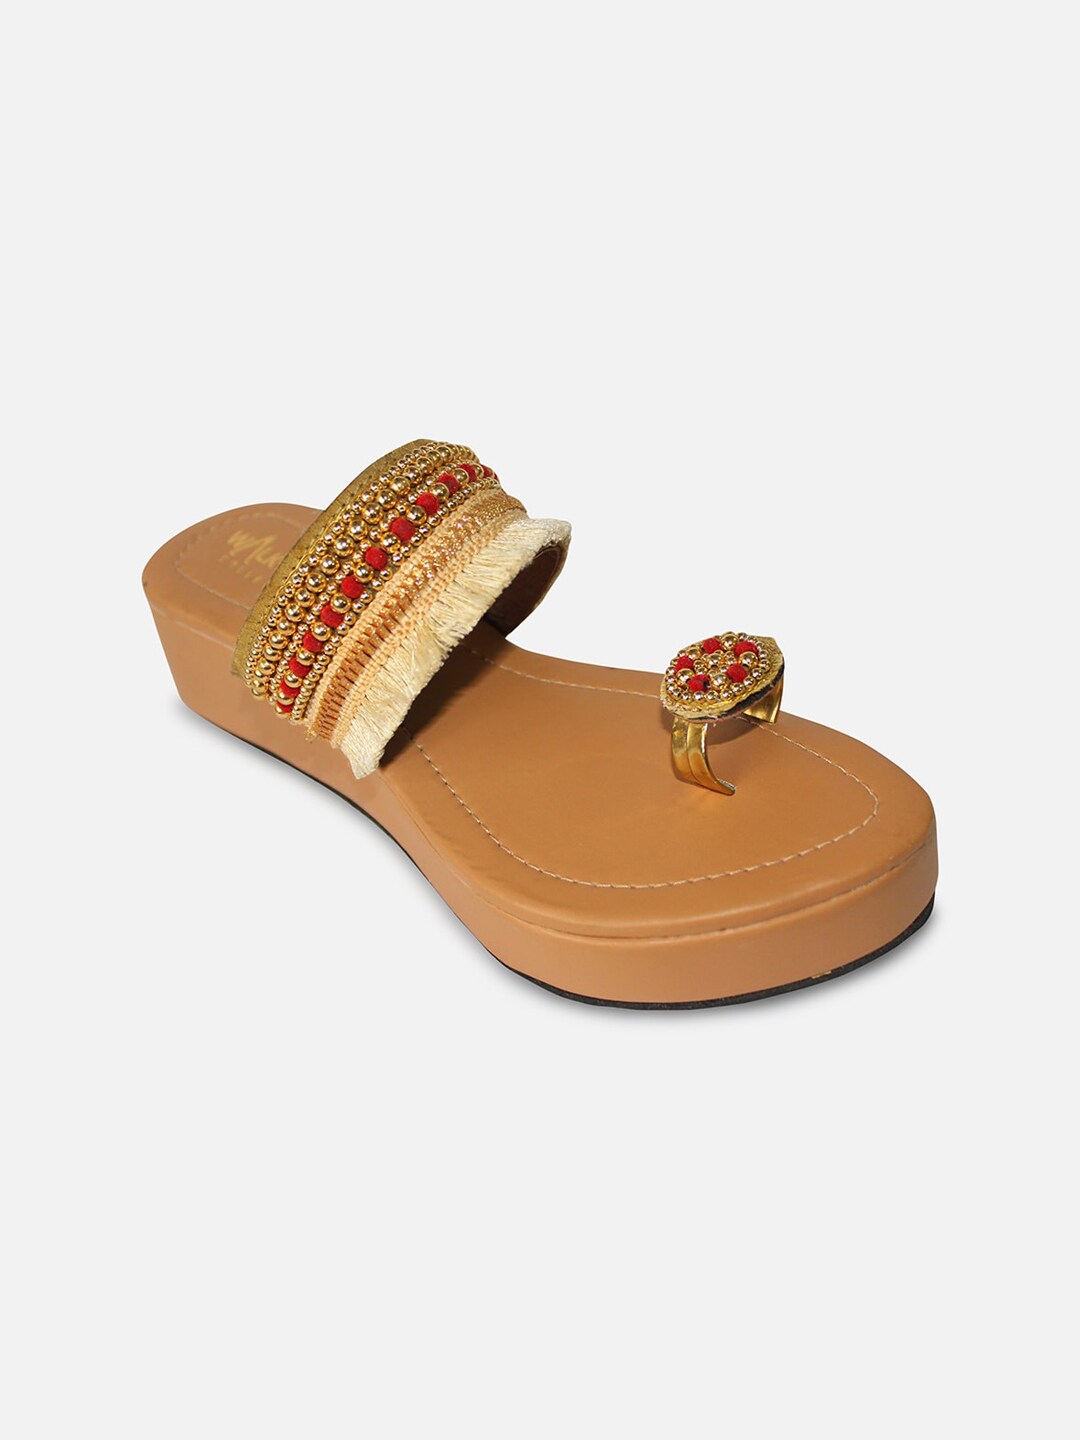 WALK N STYLE COLLECTION Brown & Beige Embellished Ethnic Flatform Sandals Price in India